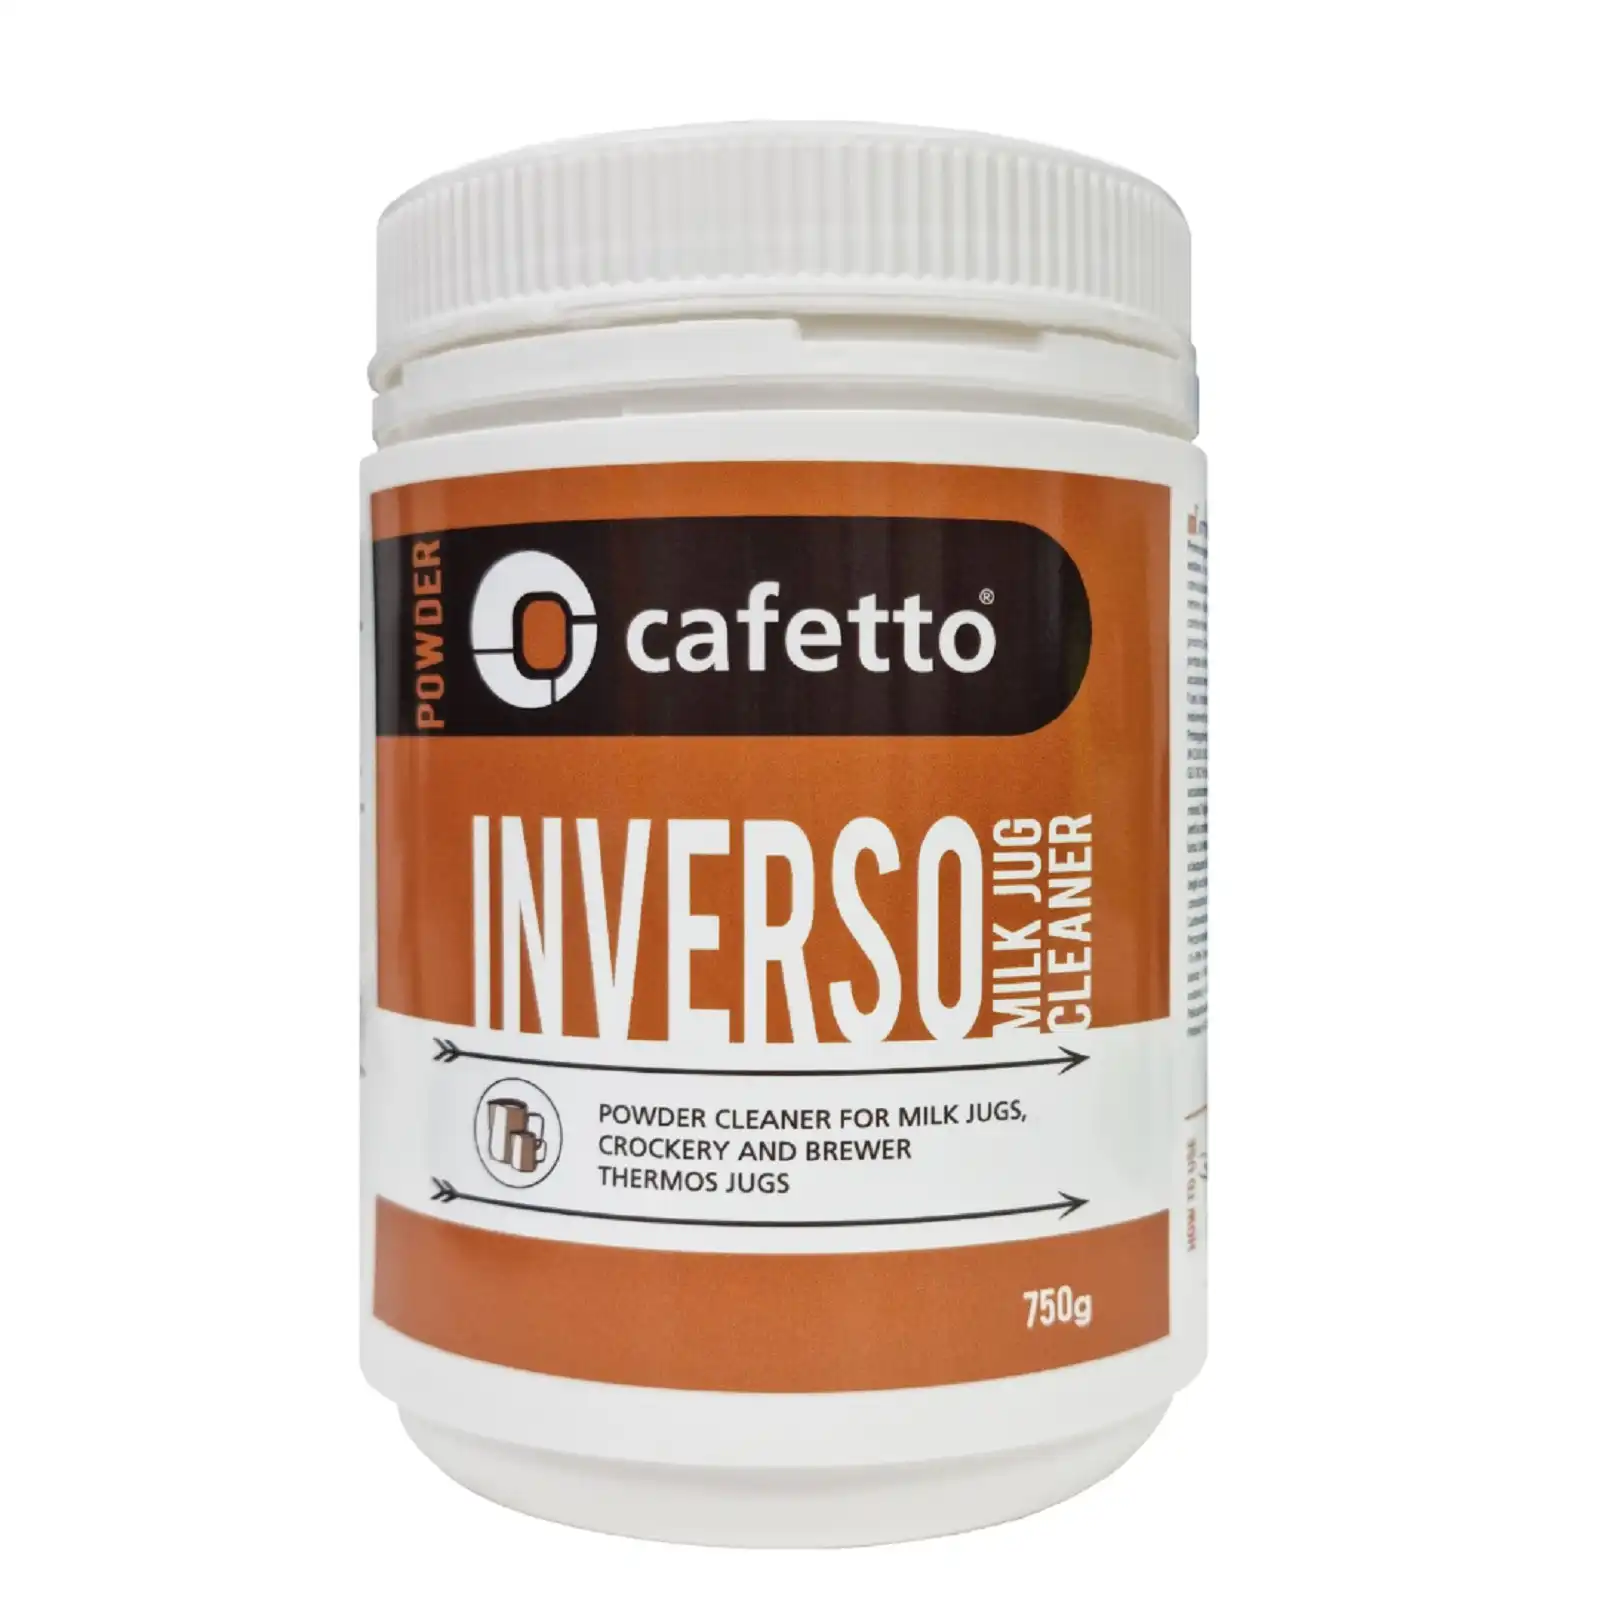 Cafetto INVERSO MILK JUG CLEANER - 750g